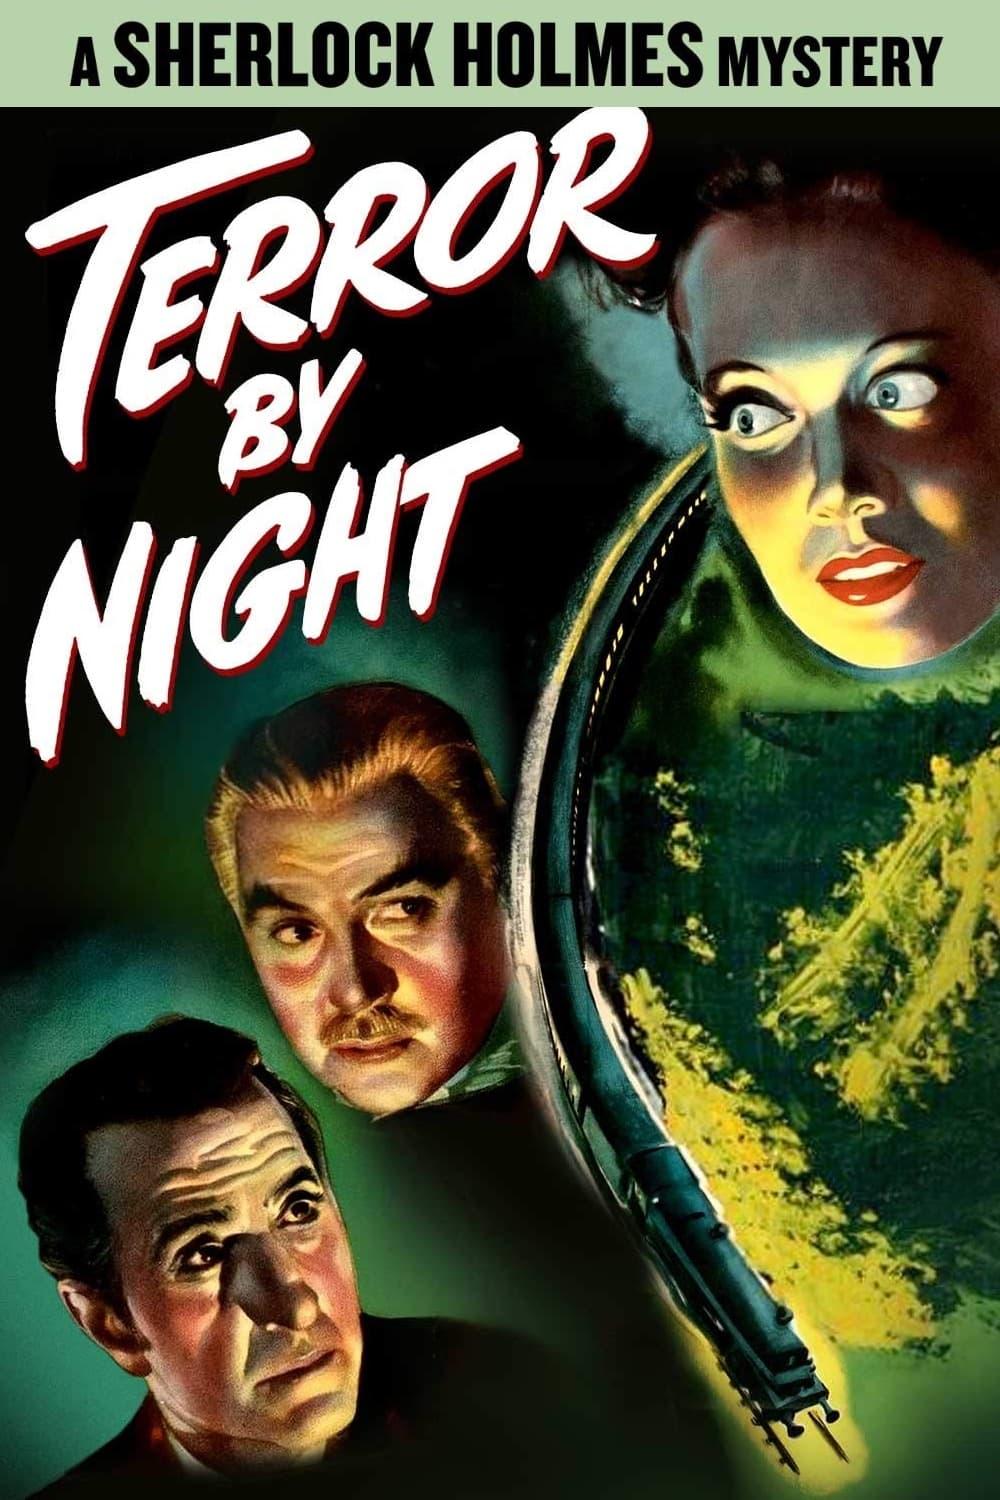 Terror by Night poster